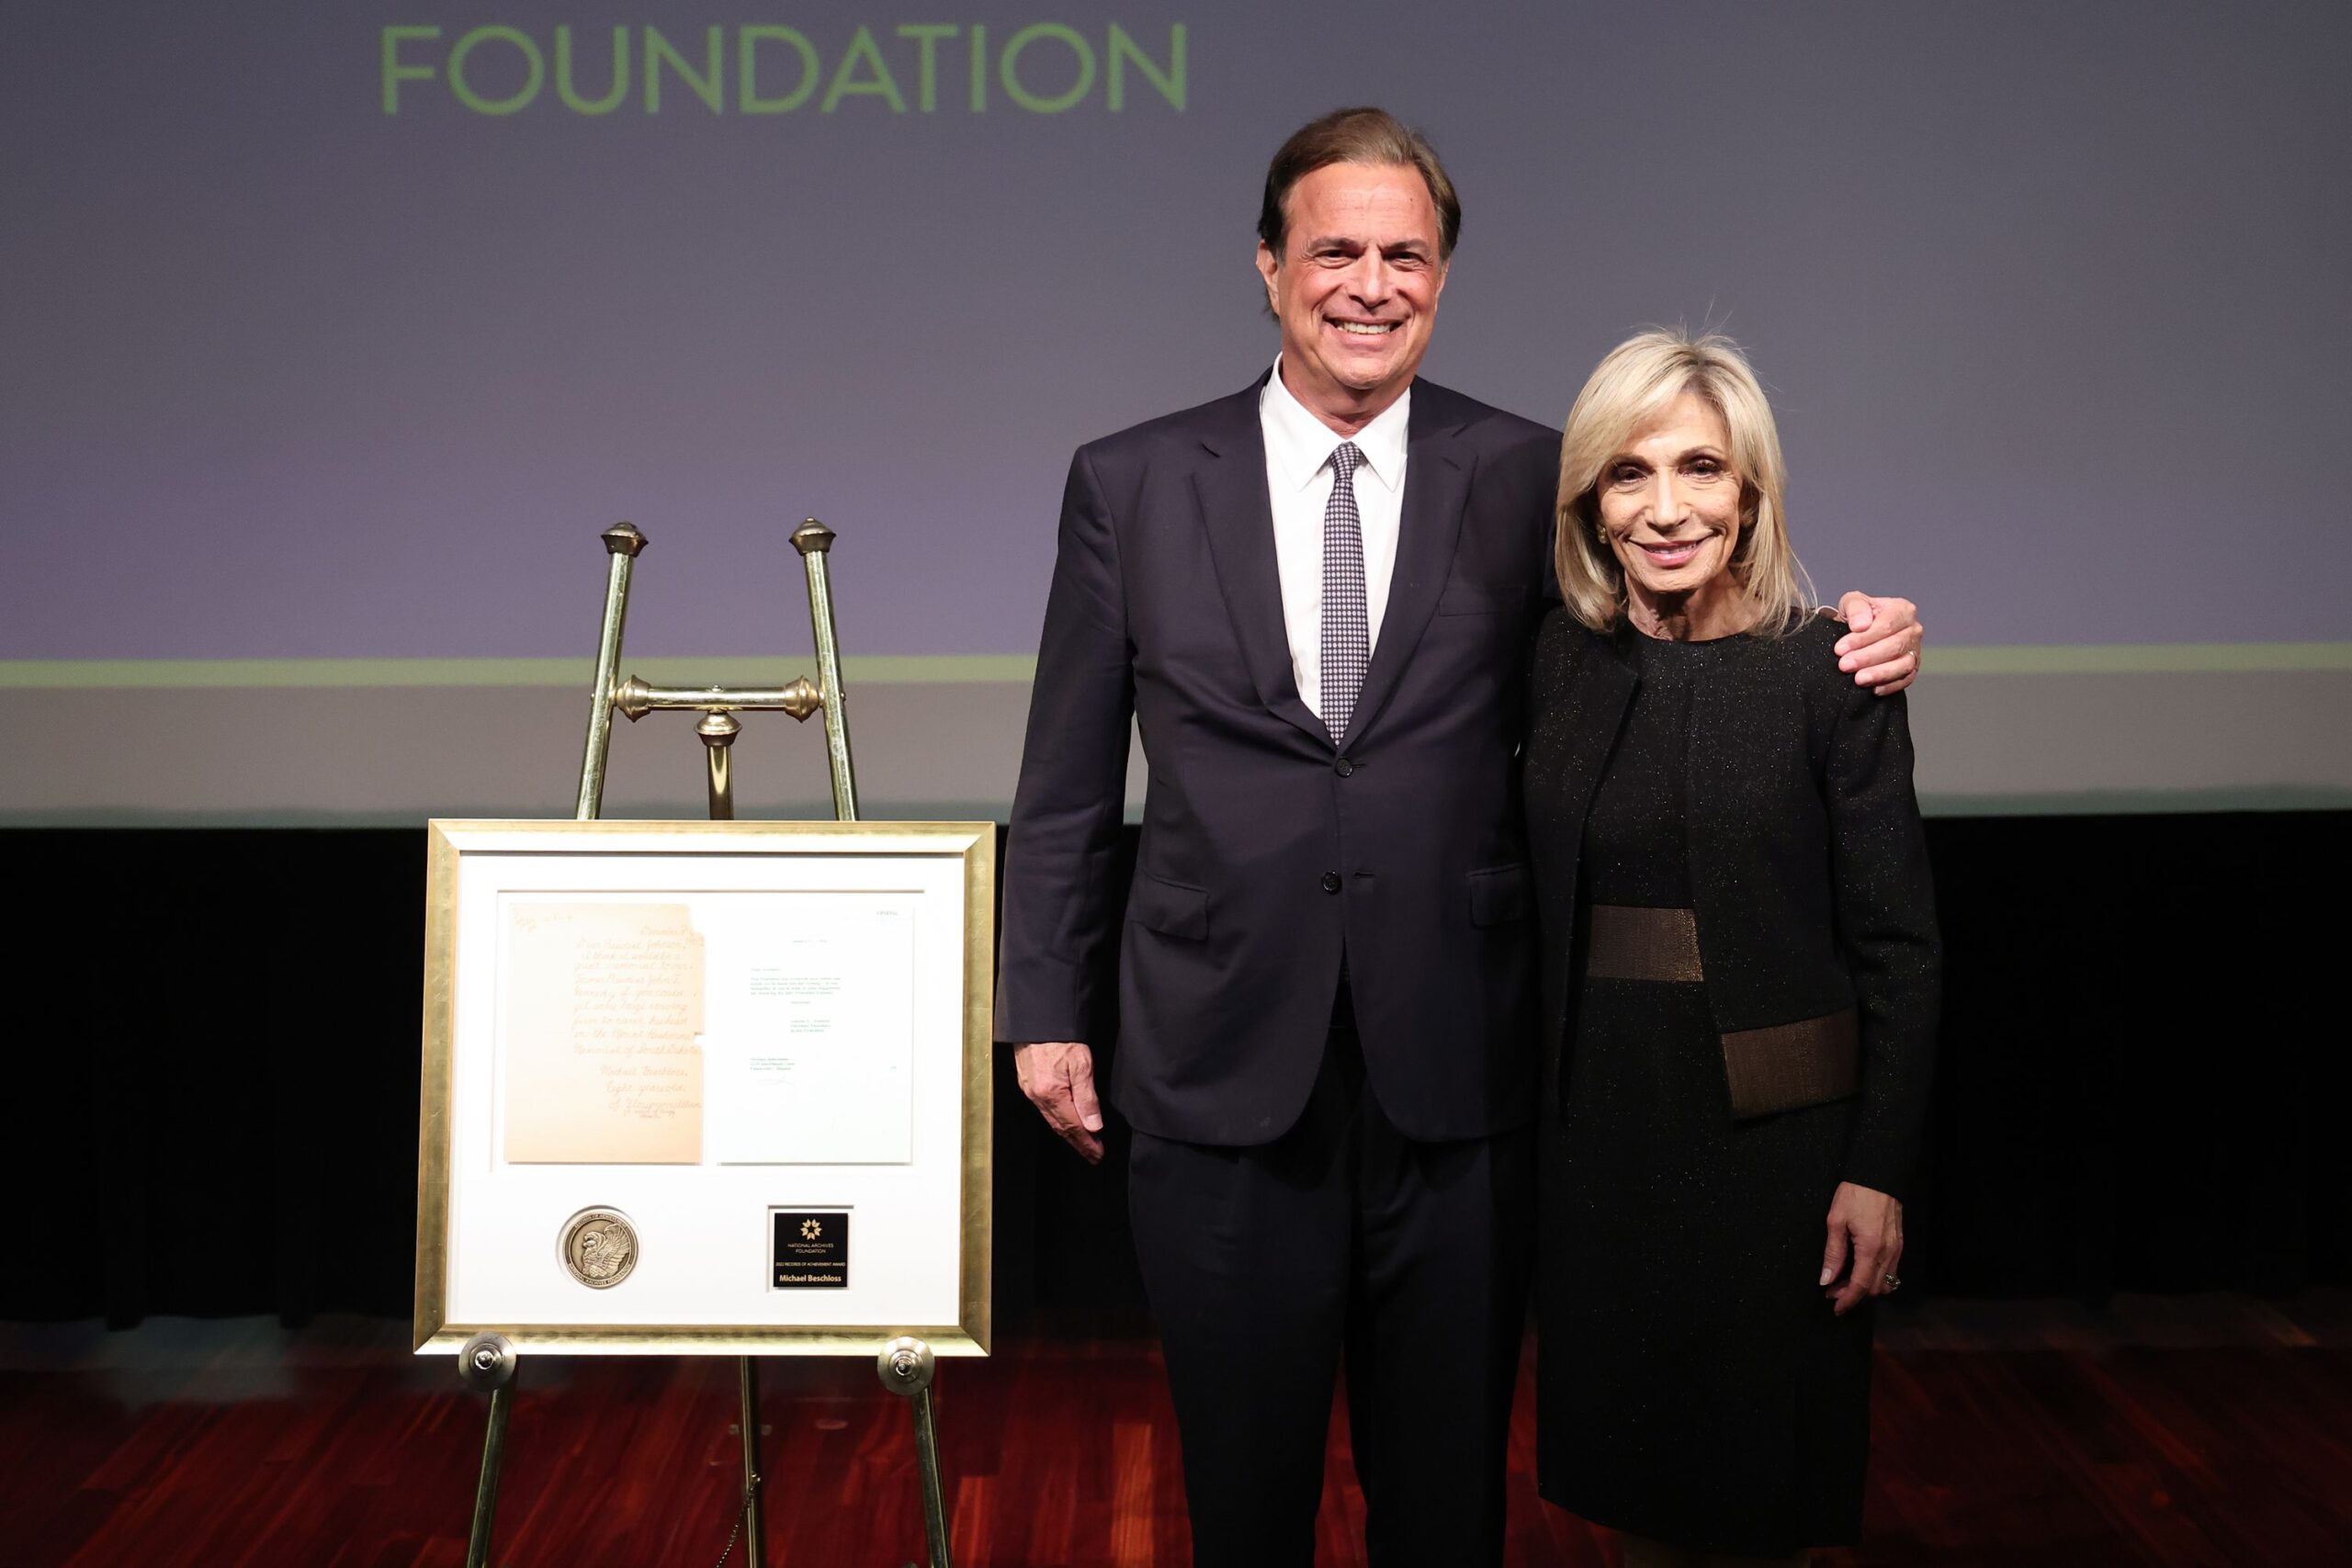 2022: Michael Beschloss and Andrea Mitchell with the Records of Achievement Award